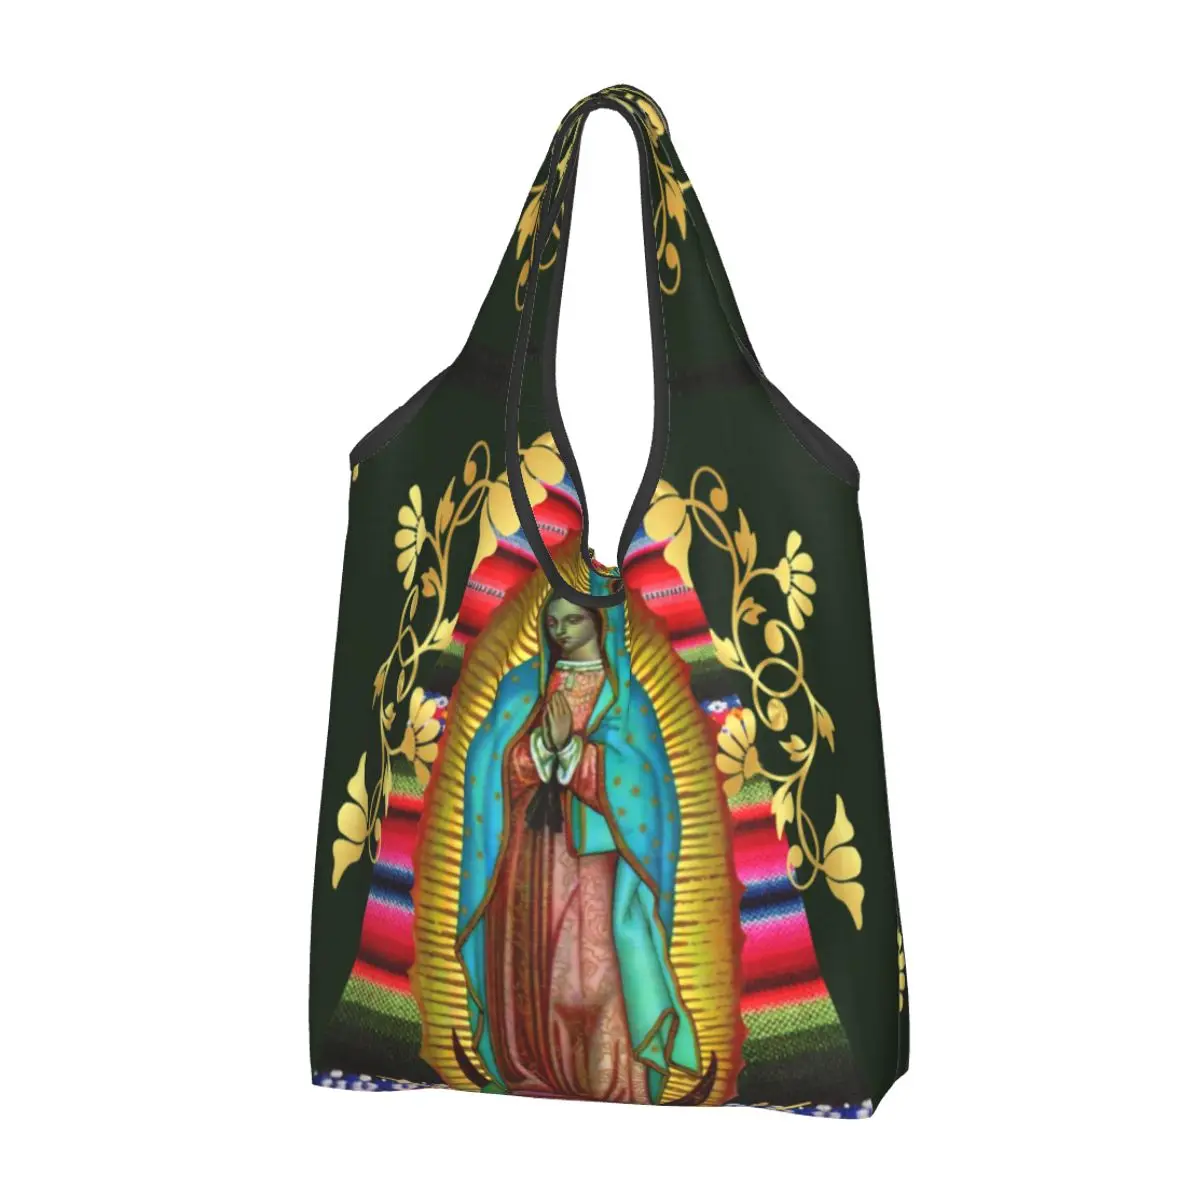 

Our Lady Of Guadalupe Virgin Mary Groceries Shopping Bag Shopper Tote Shoulder Bag Large Portable Jesus Mexico Christian Handbag